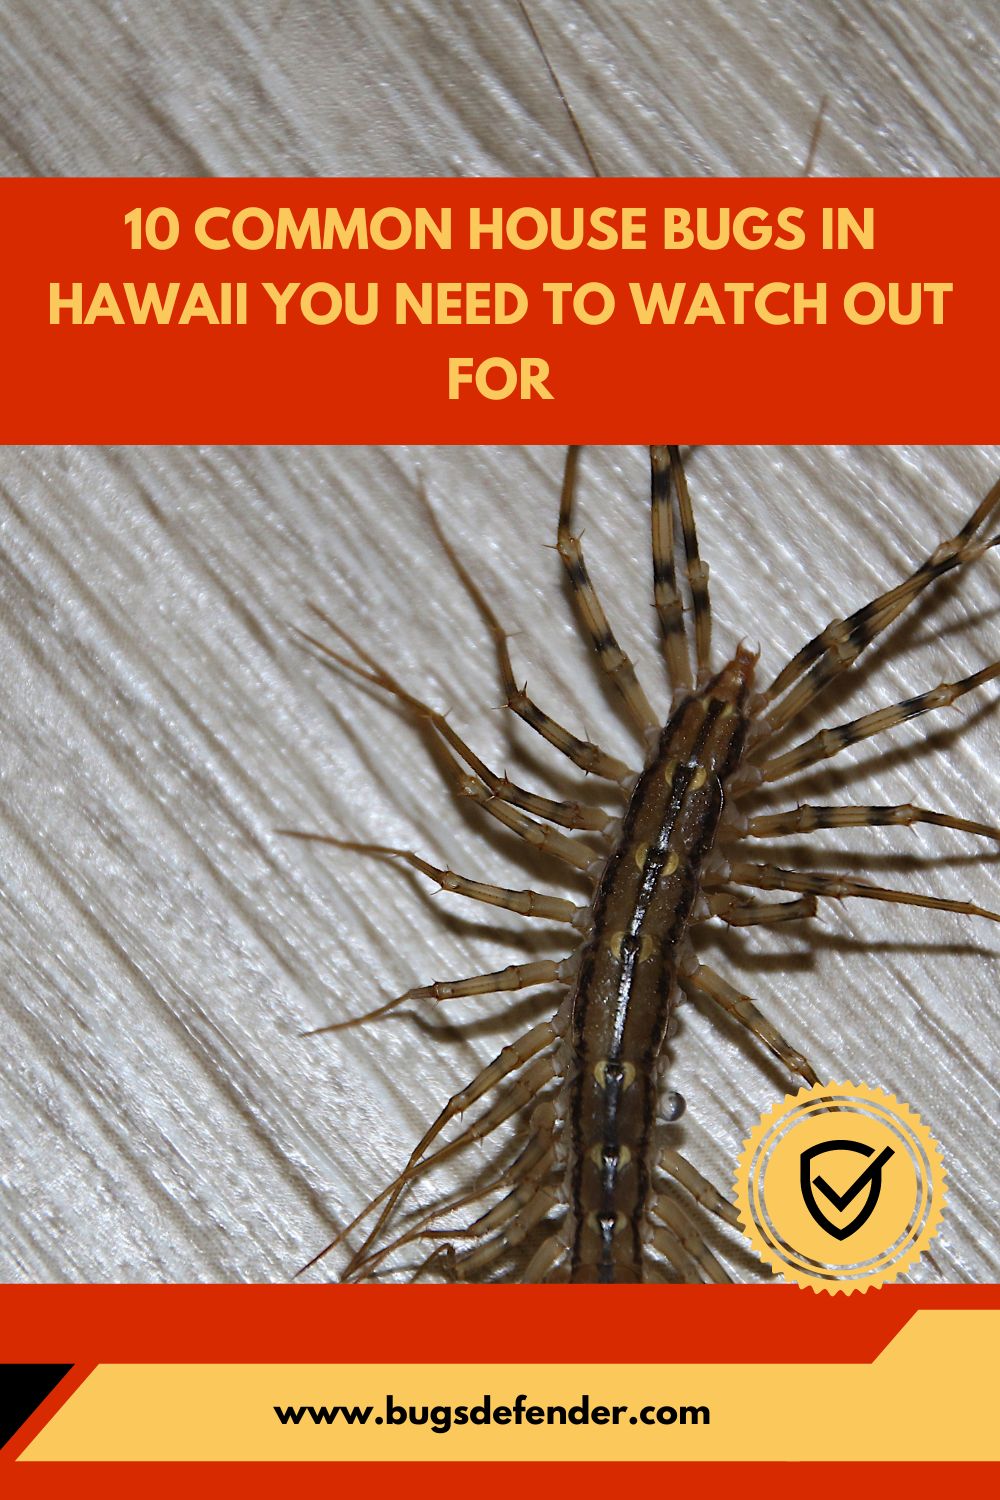 10 Common House Bugs In Hawaii You Need To Watch Out For pin1